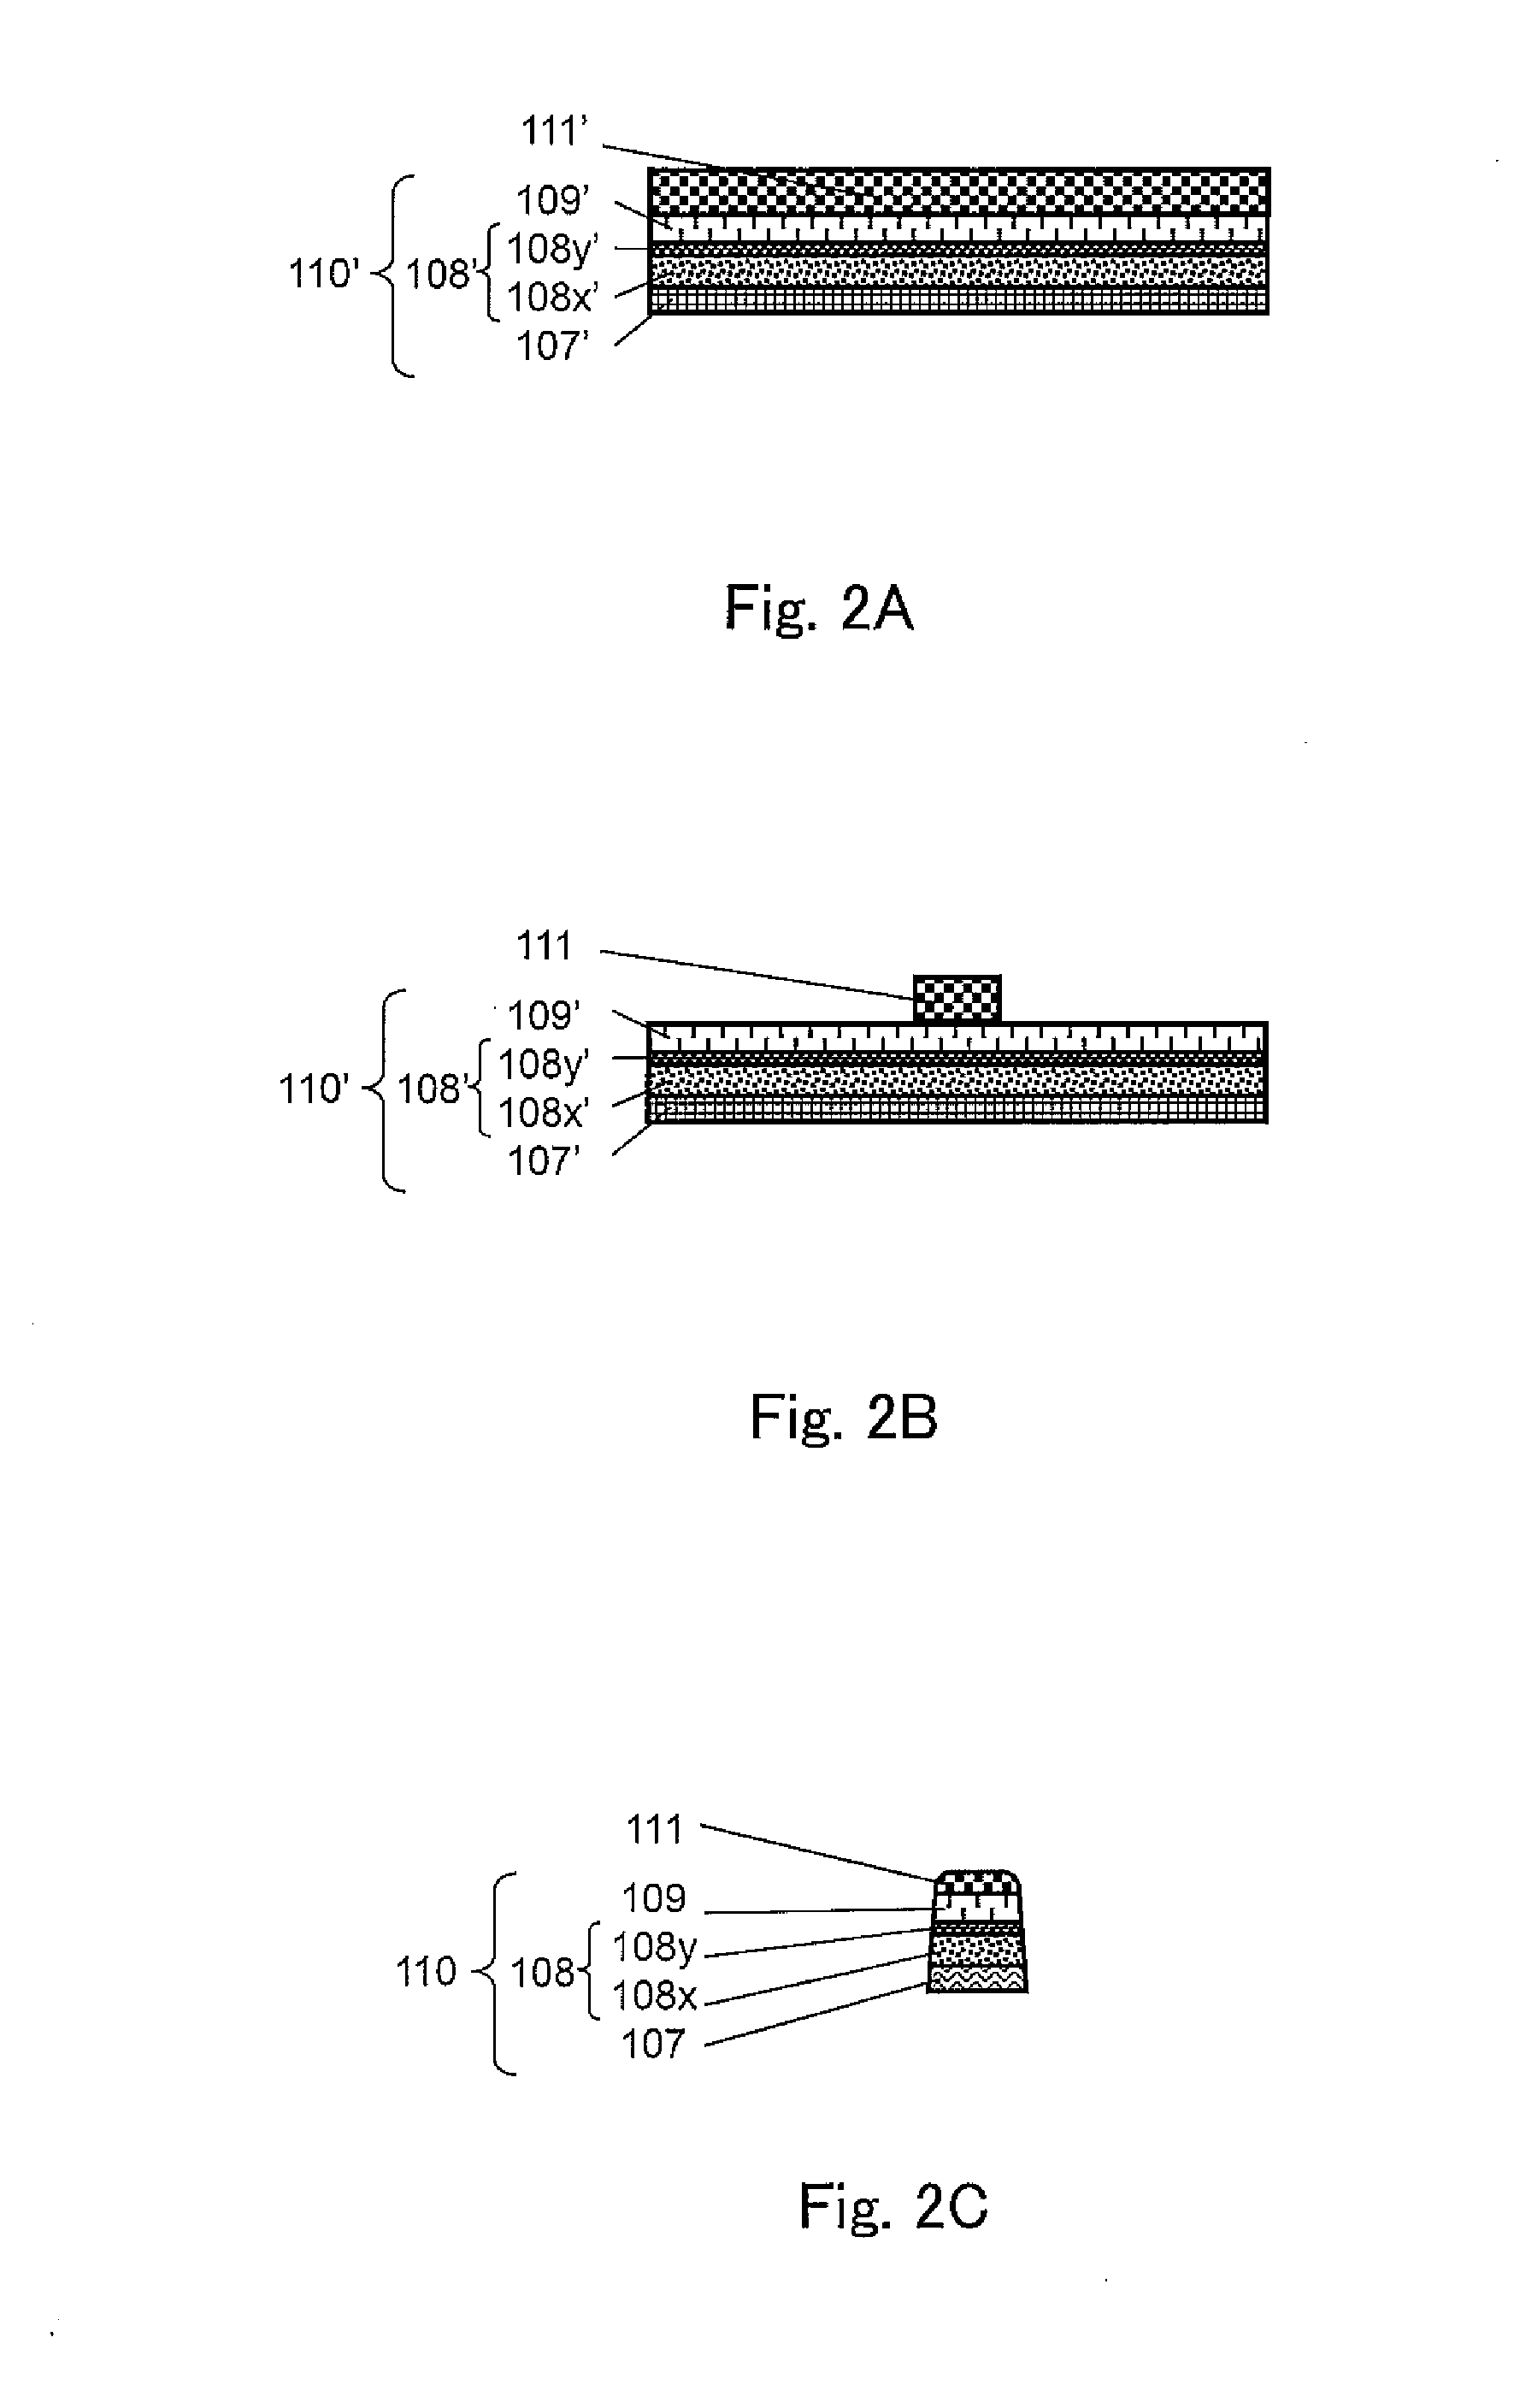 Non-volatile memory device and manufacturing method thereof